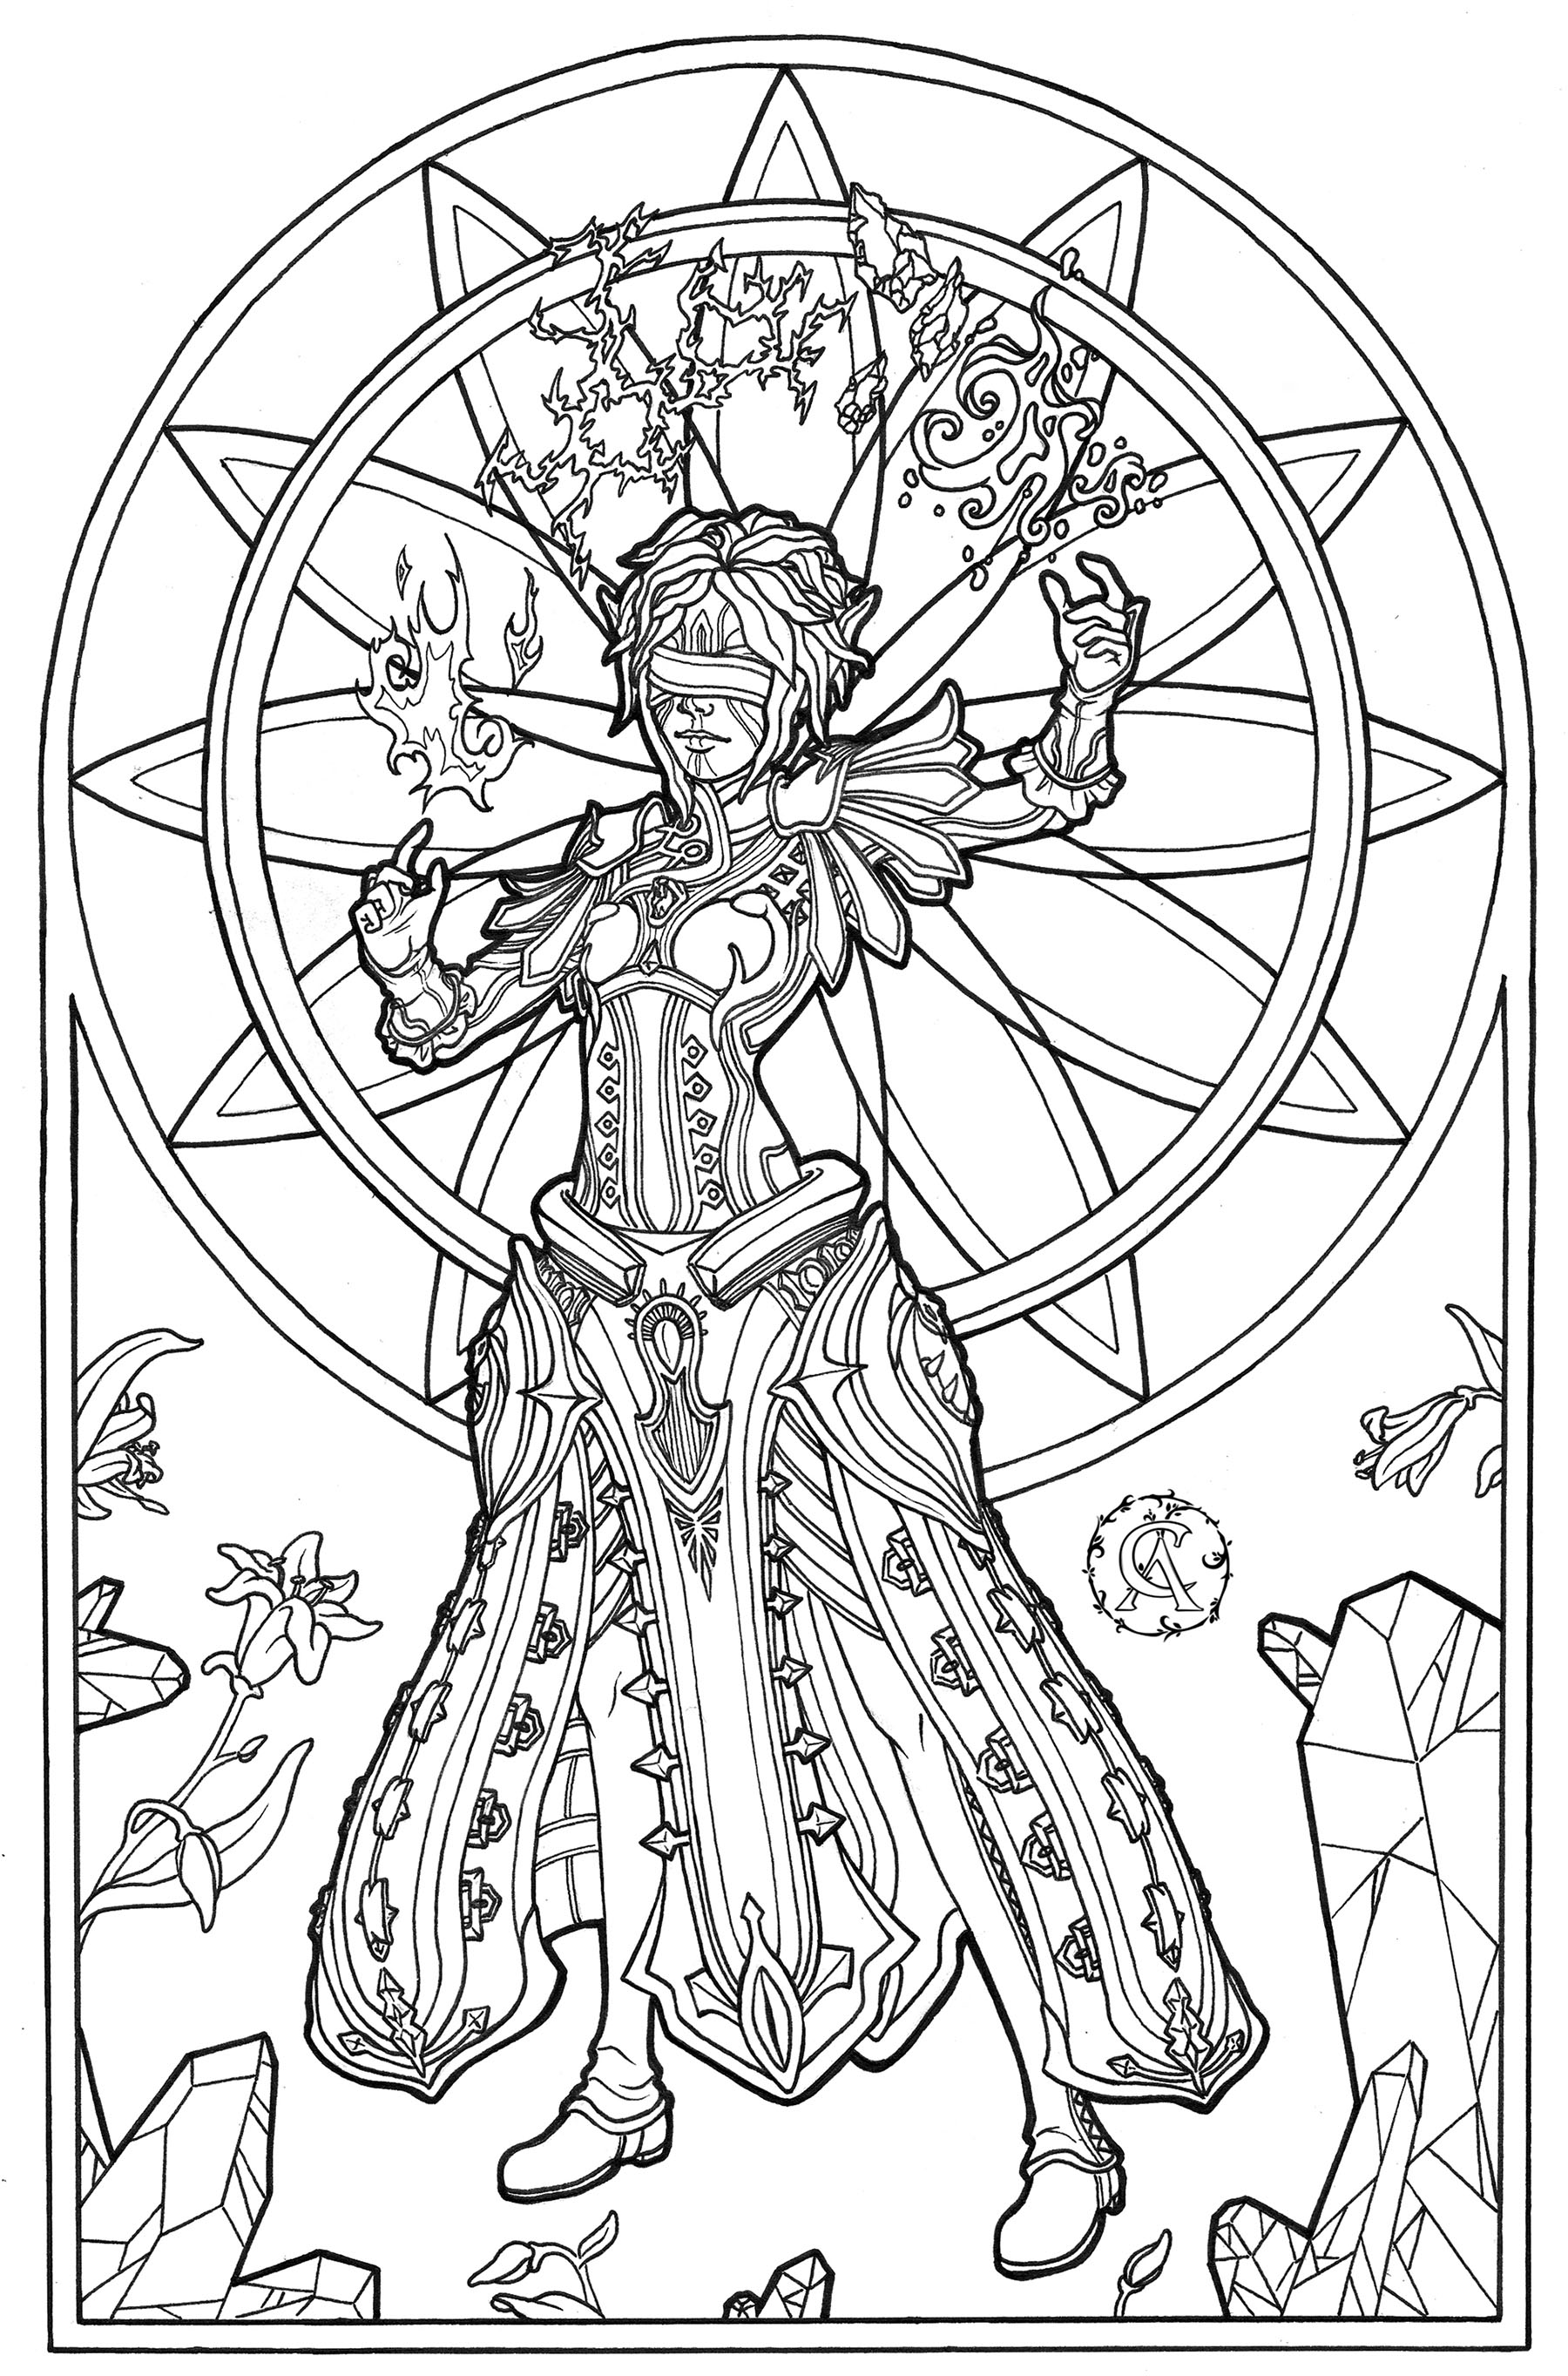 Download The magician - Myths & legends Adult Coloring Pages